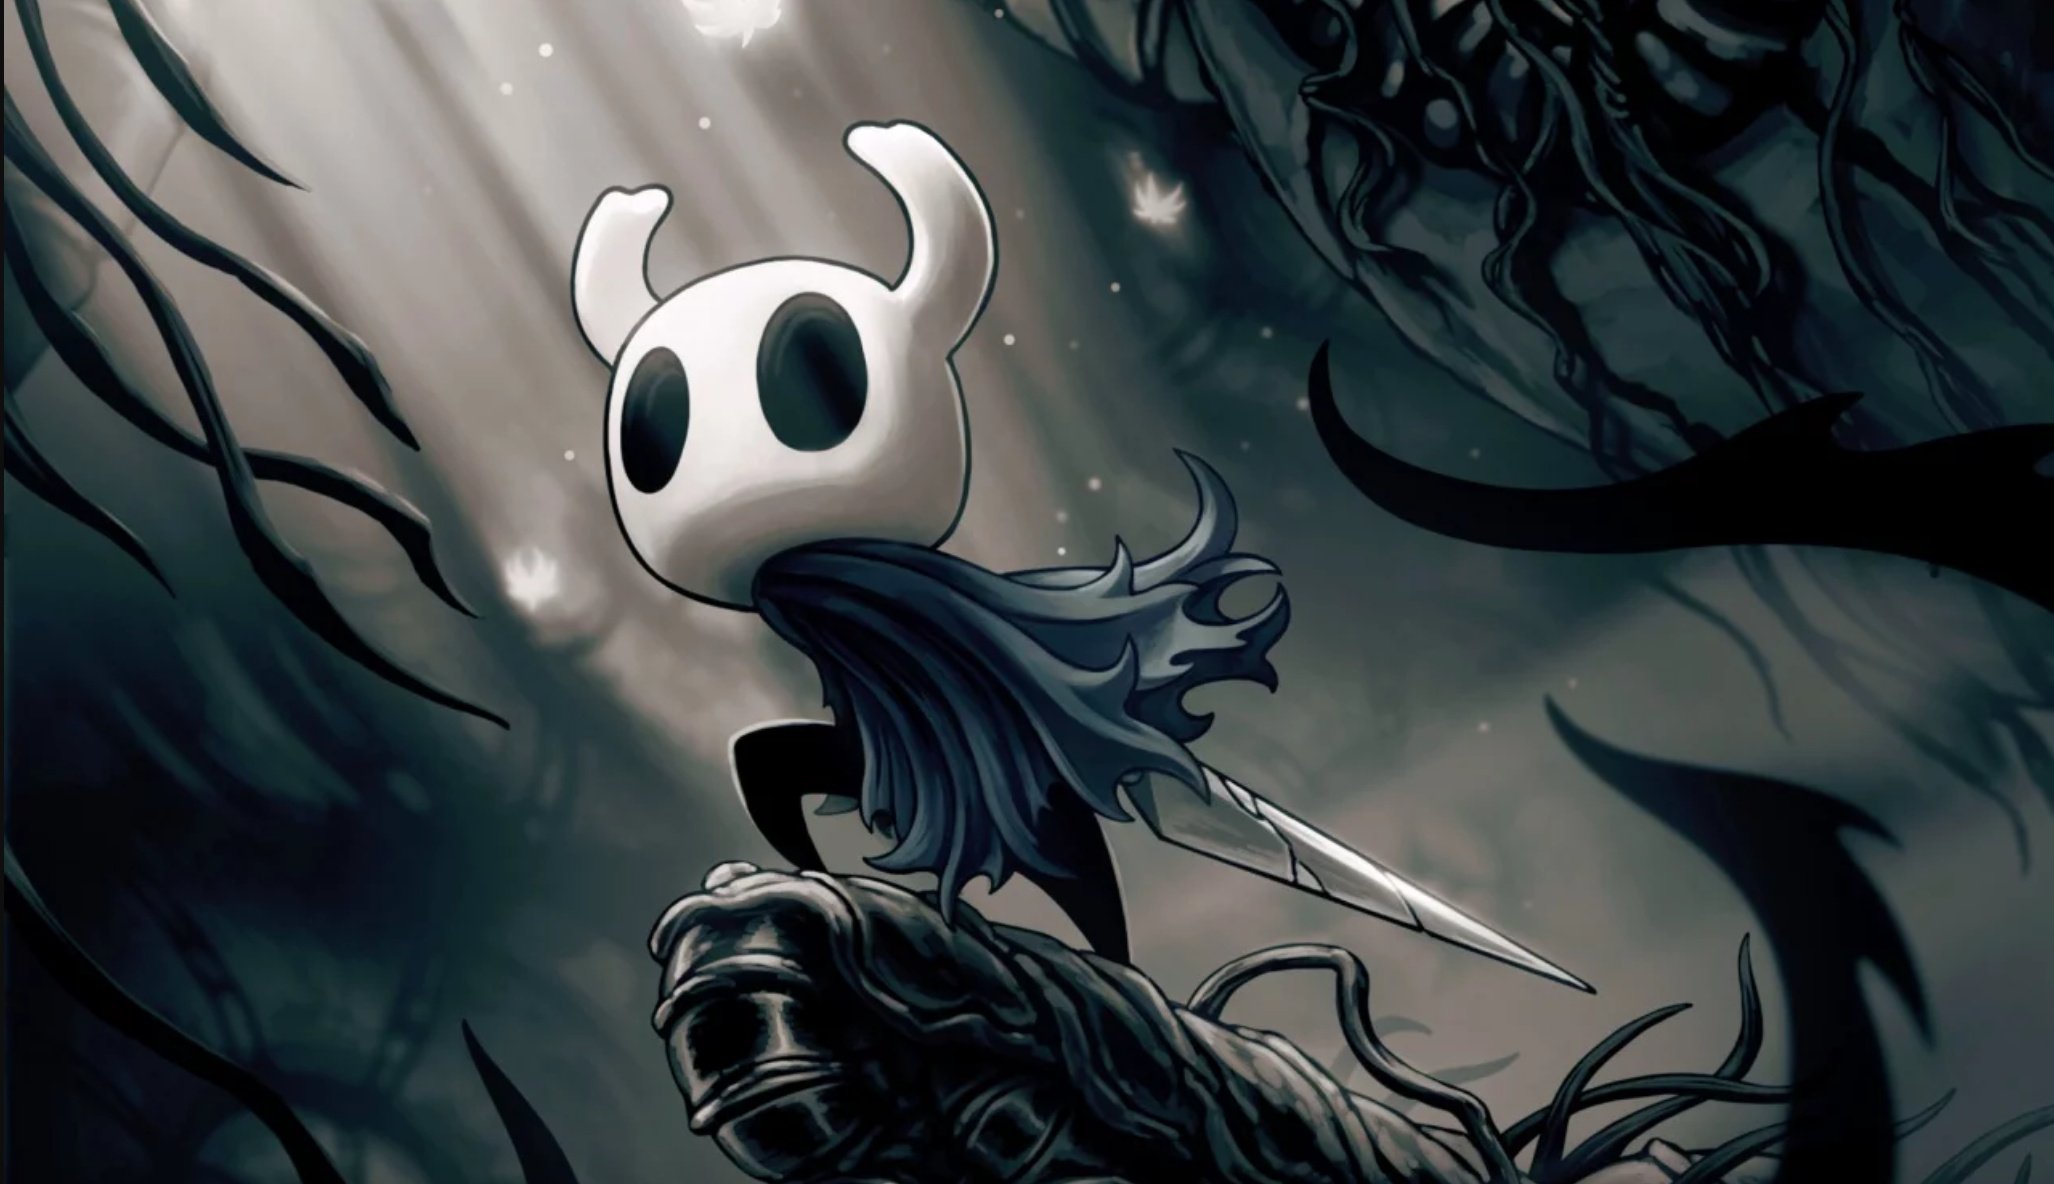 games like hollow knight